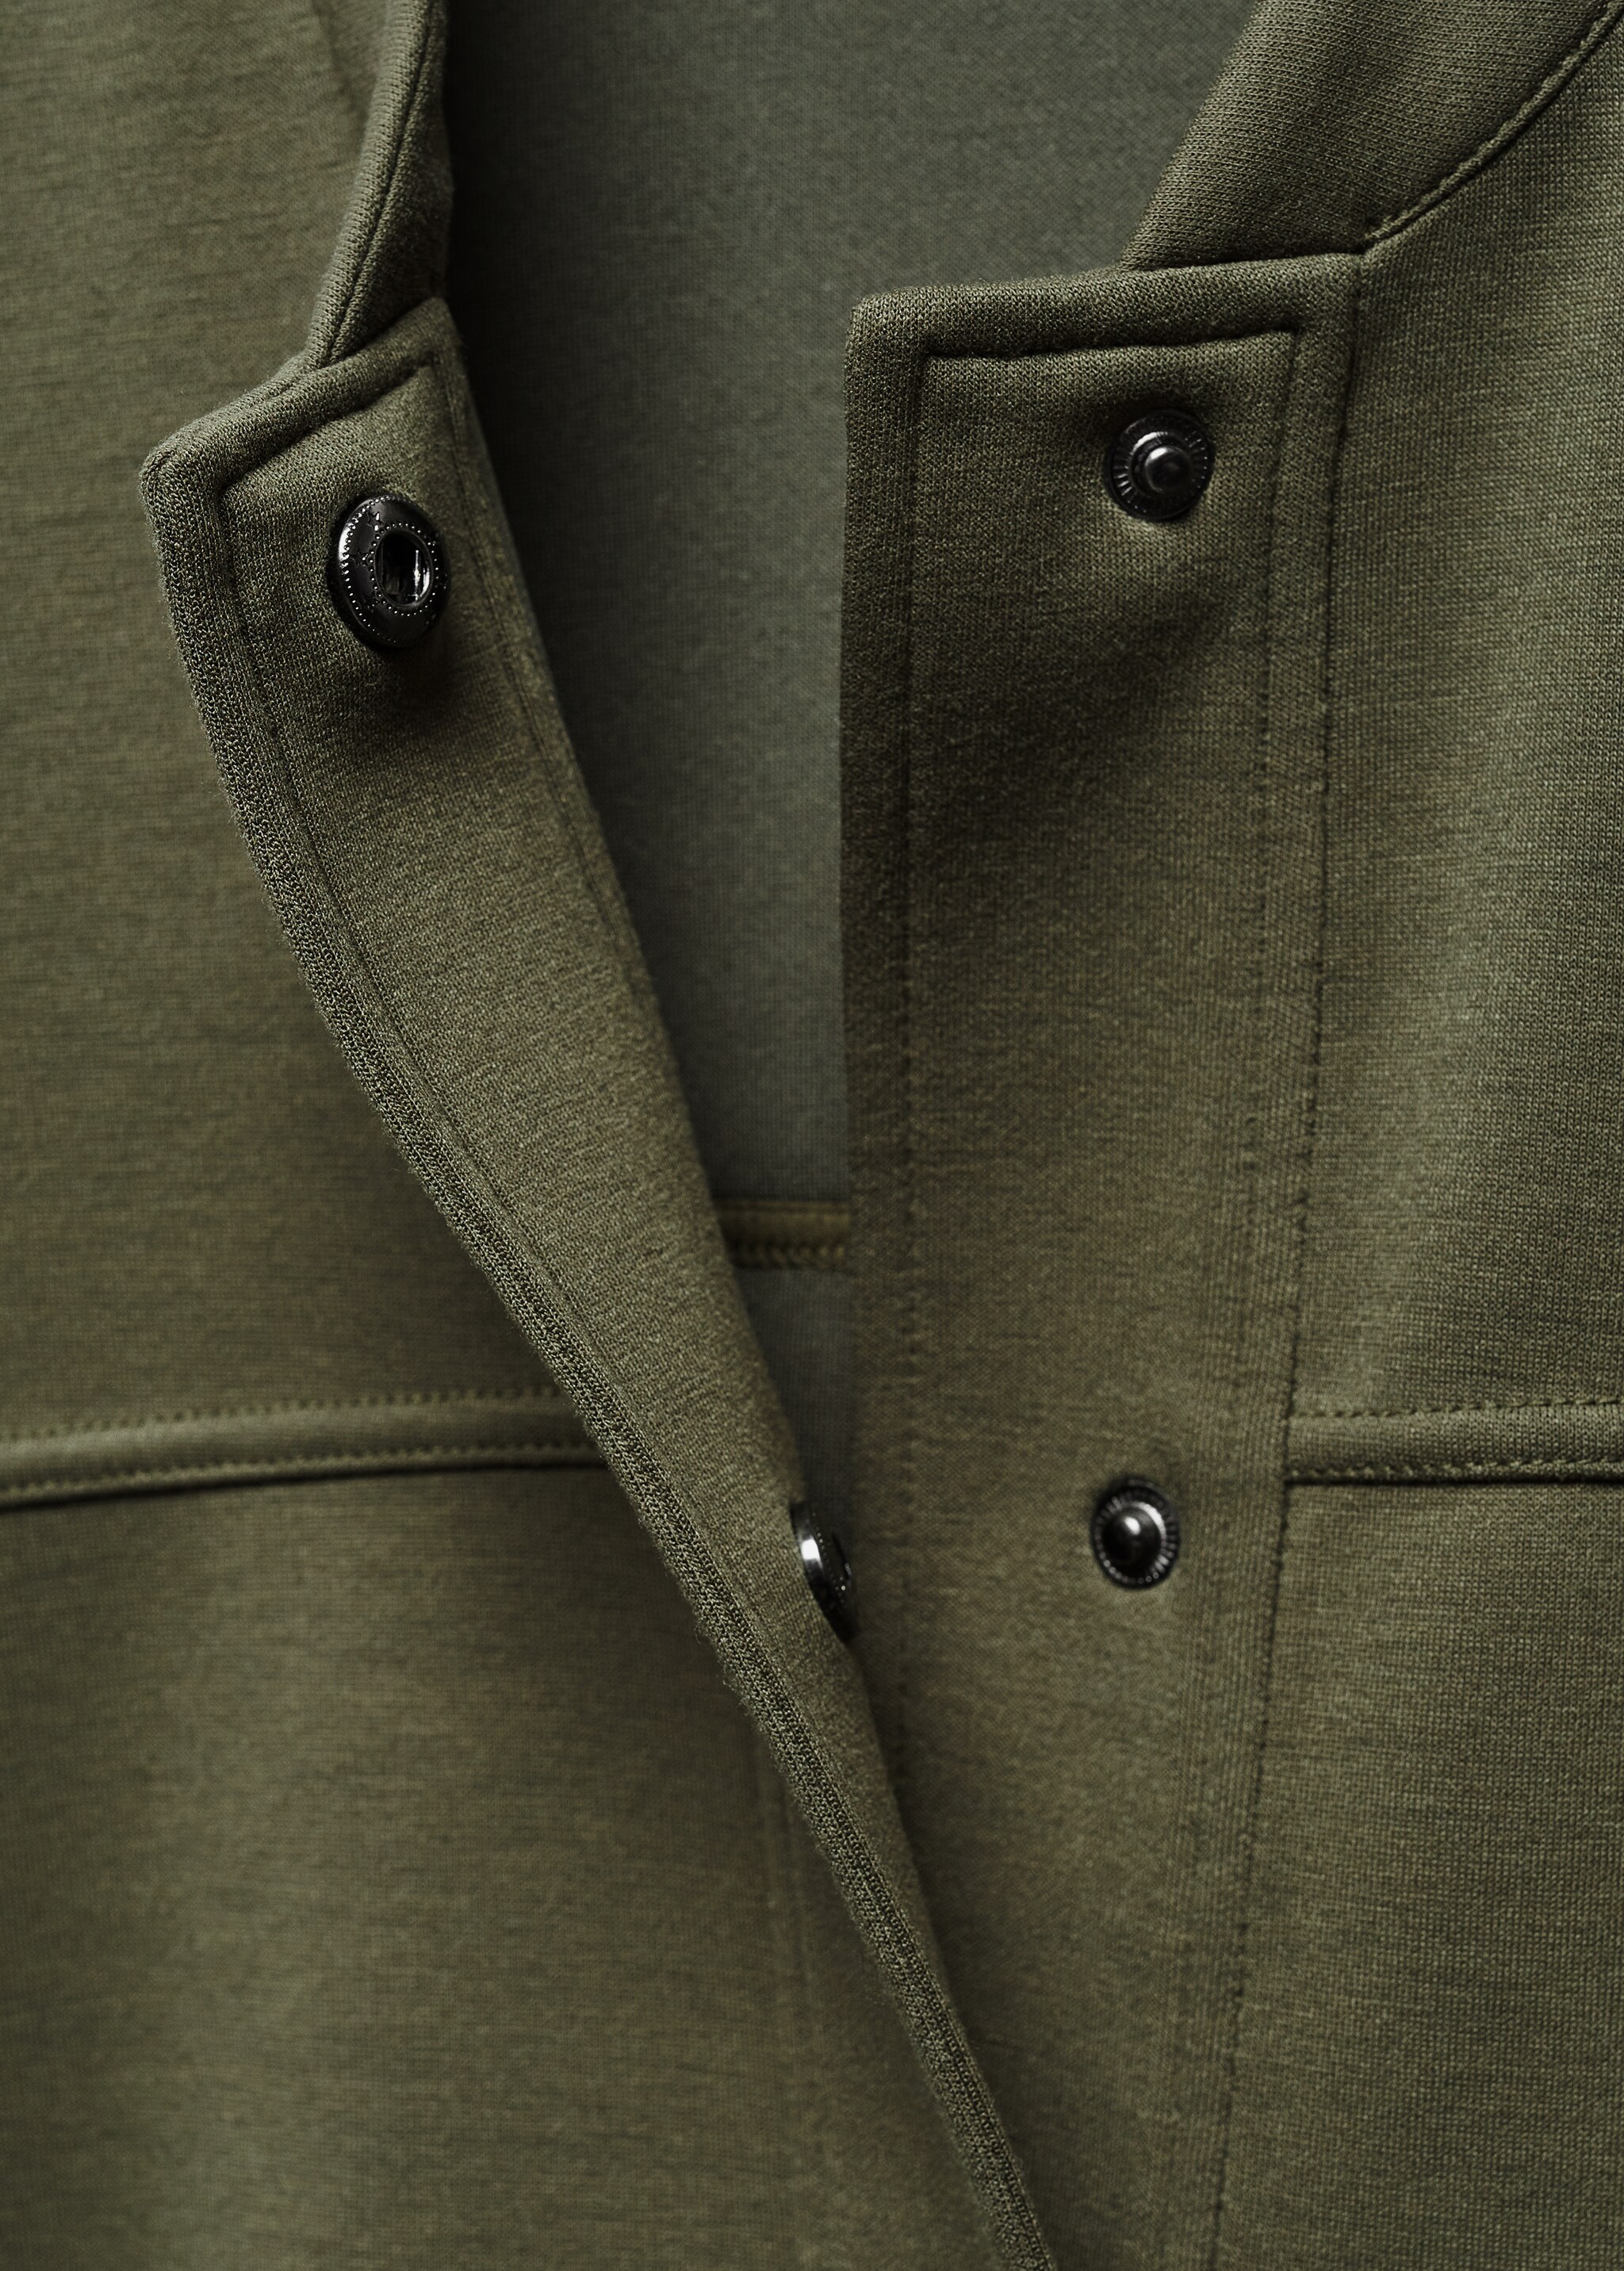 Bomber jacket decorative seams - Details of the article 8